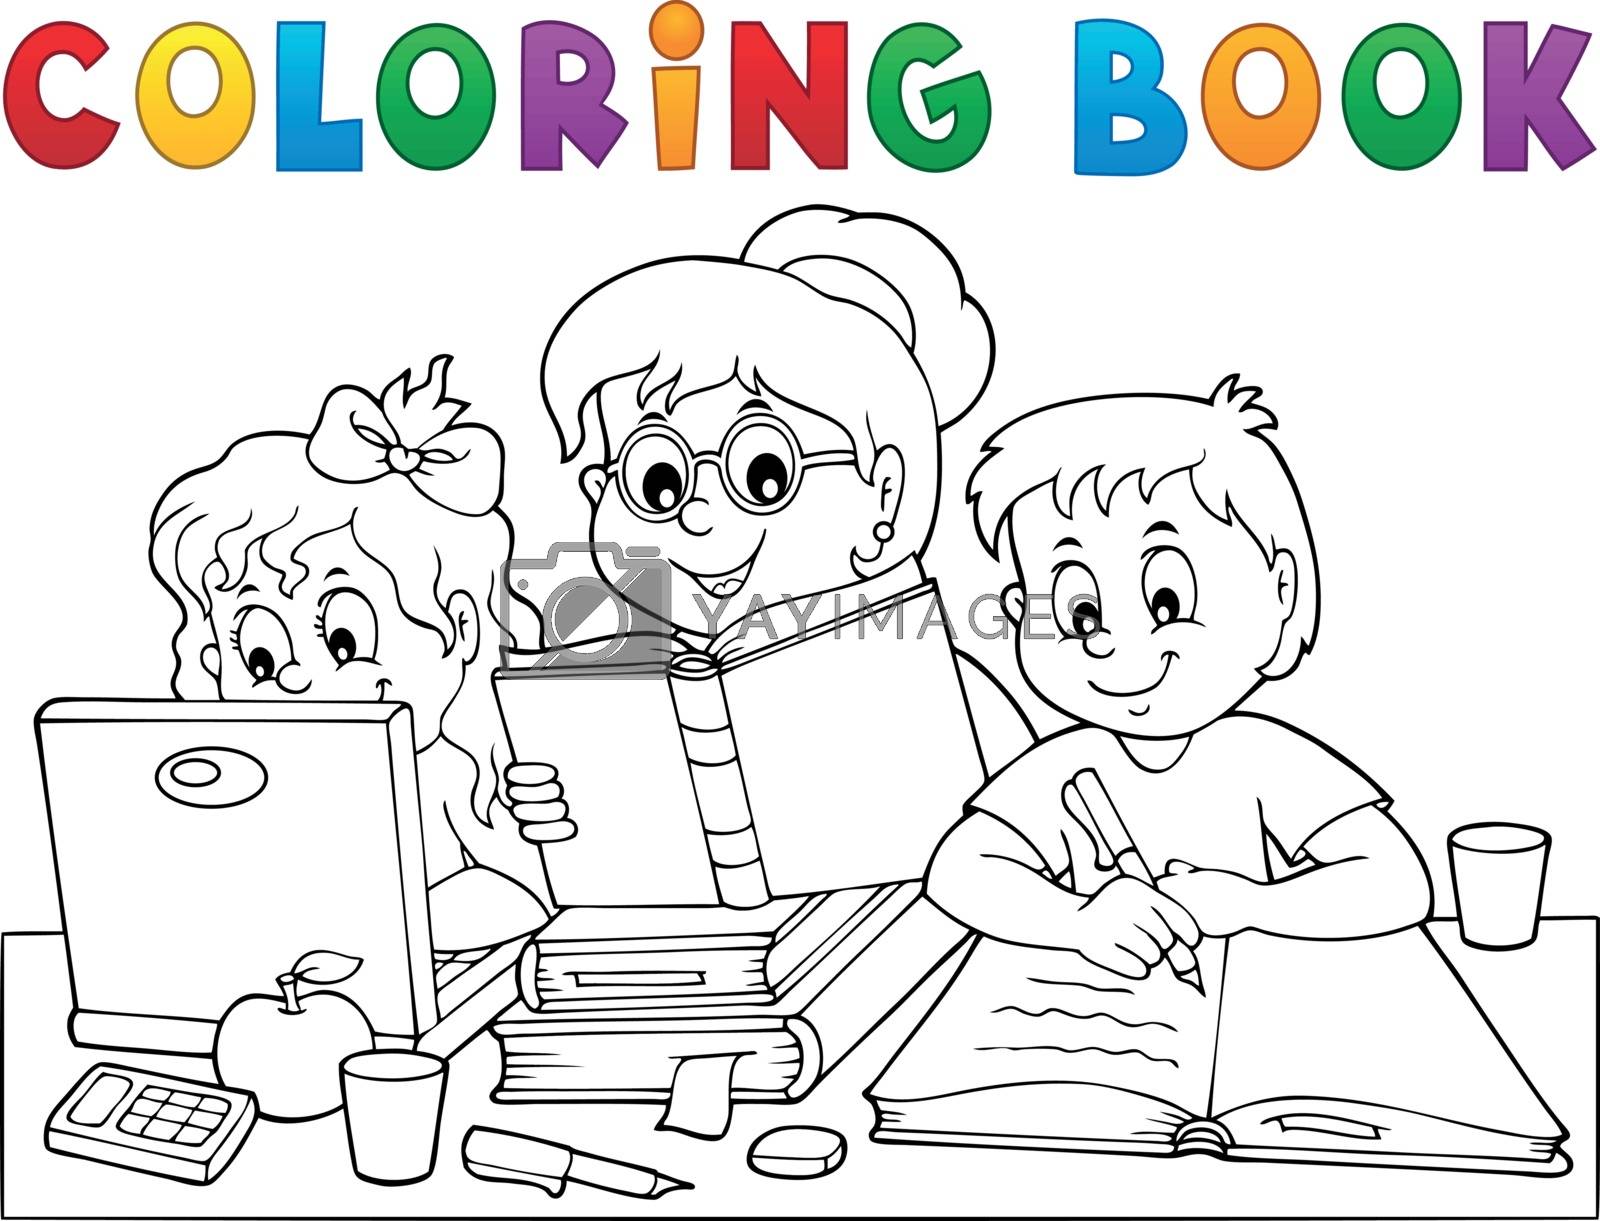 Royalty free image of Coloring book home schooling image 1 by clairev